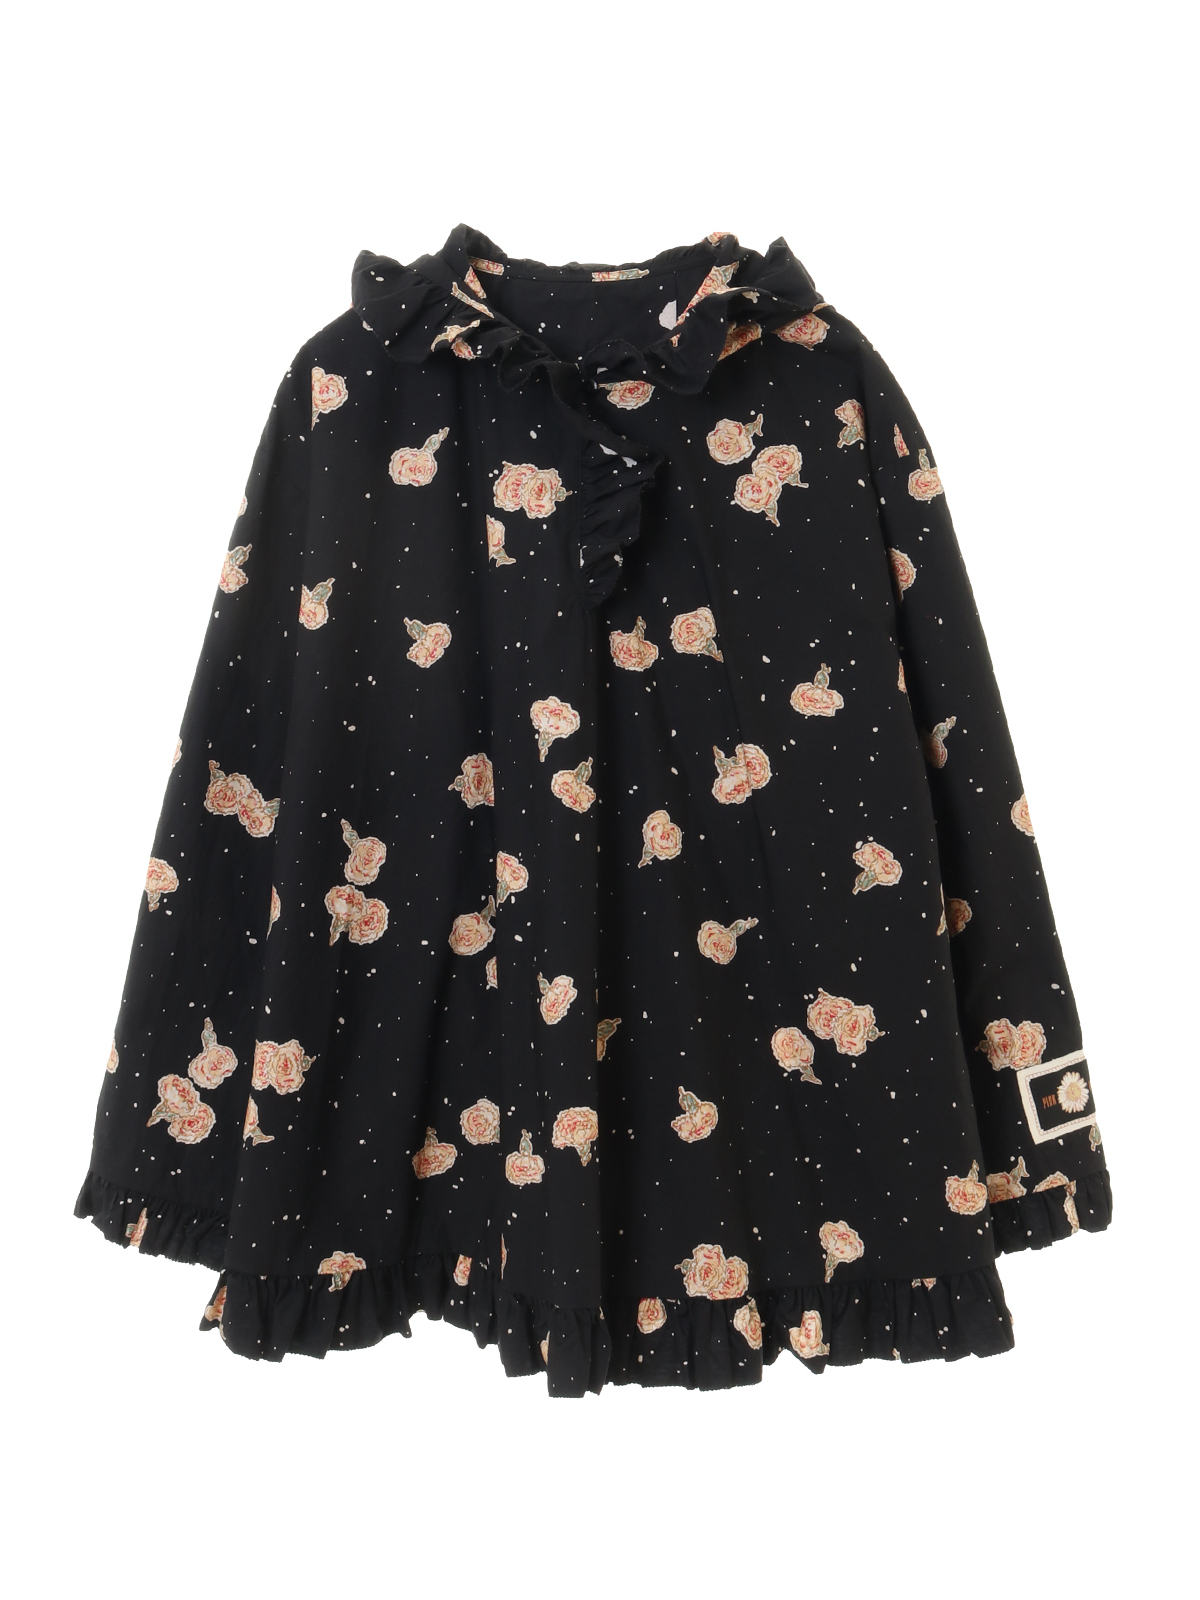 【OUTLET】Carnation print frill blouse